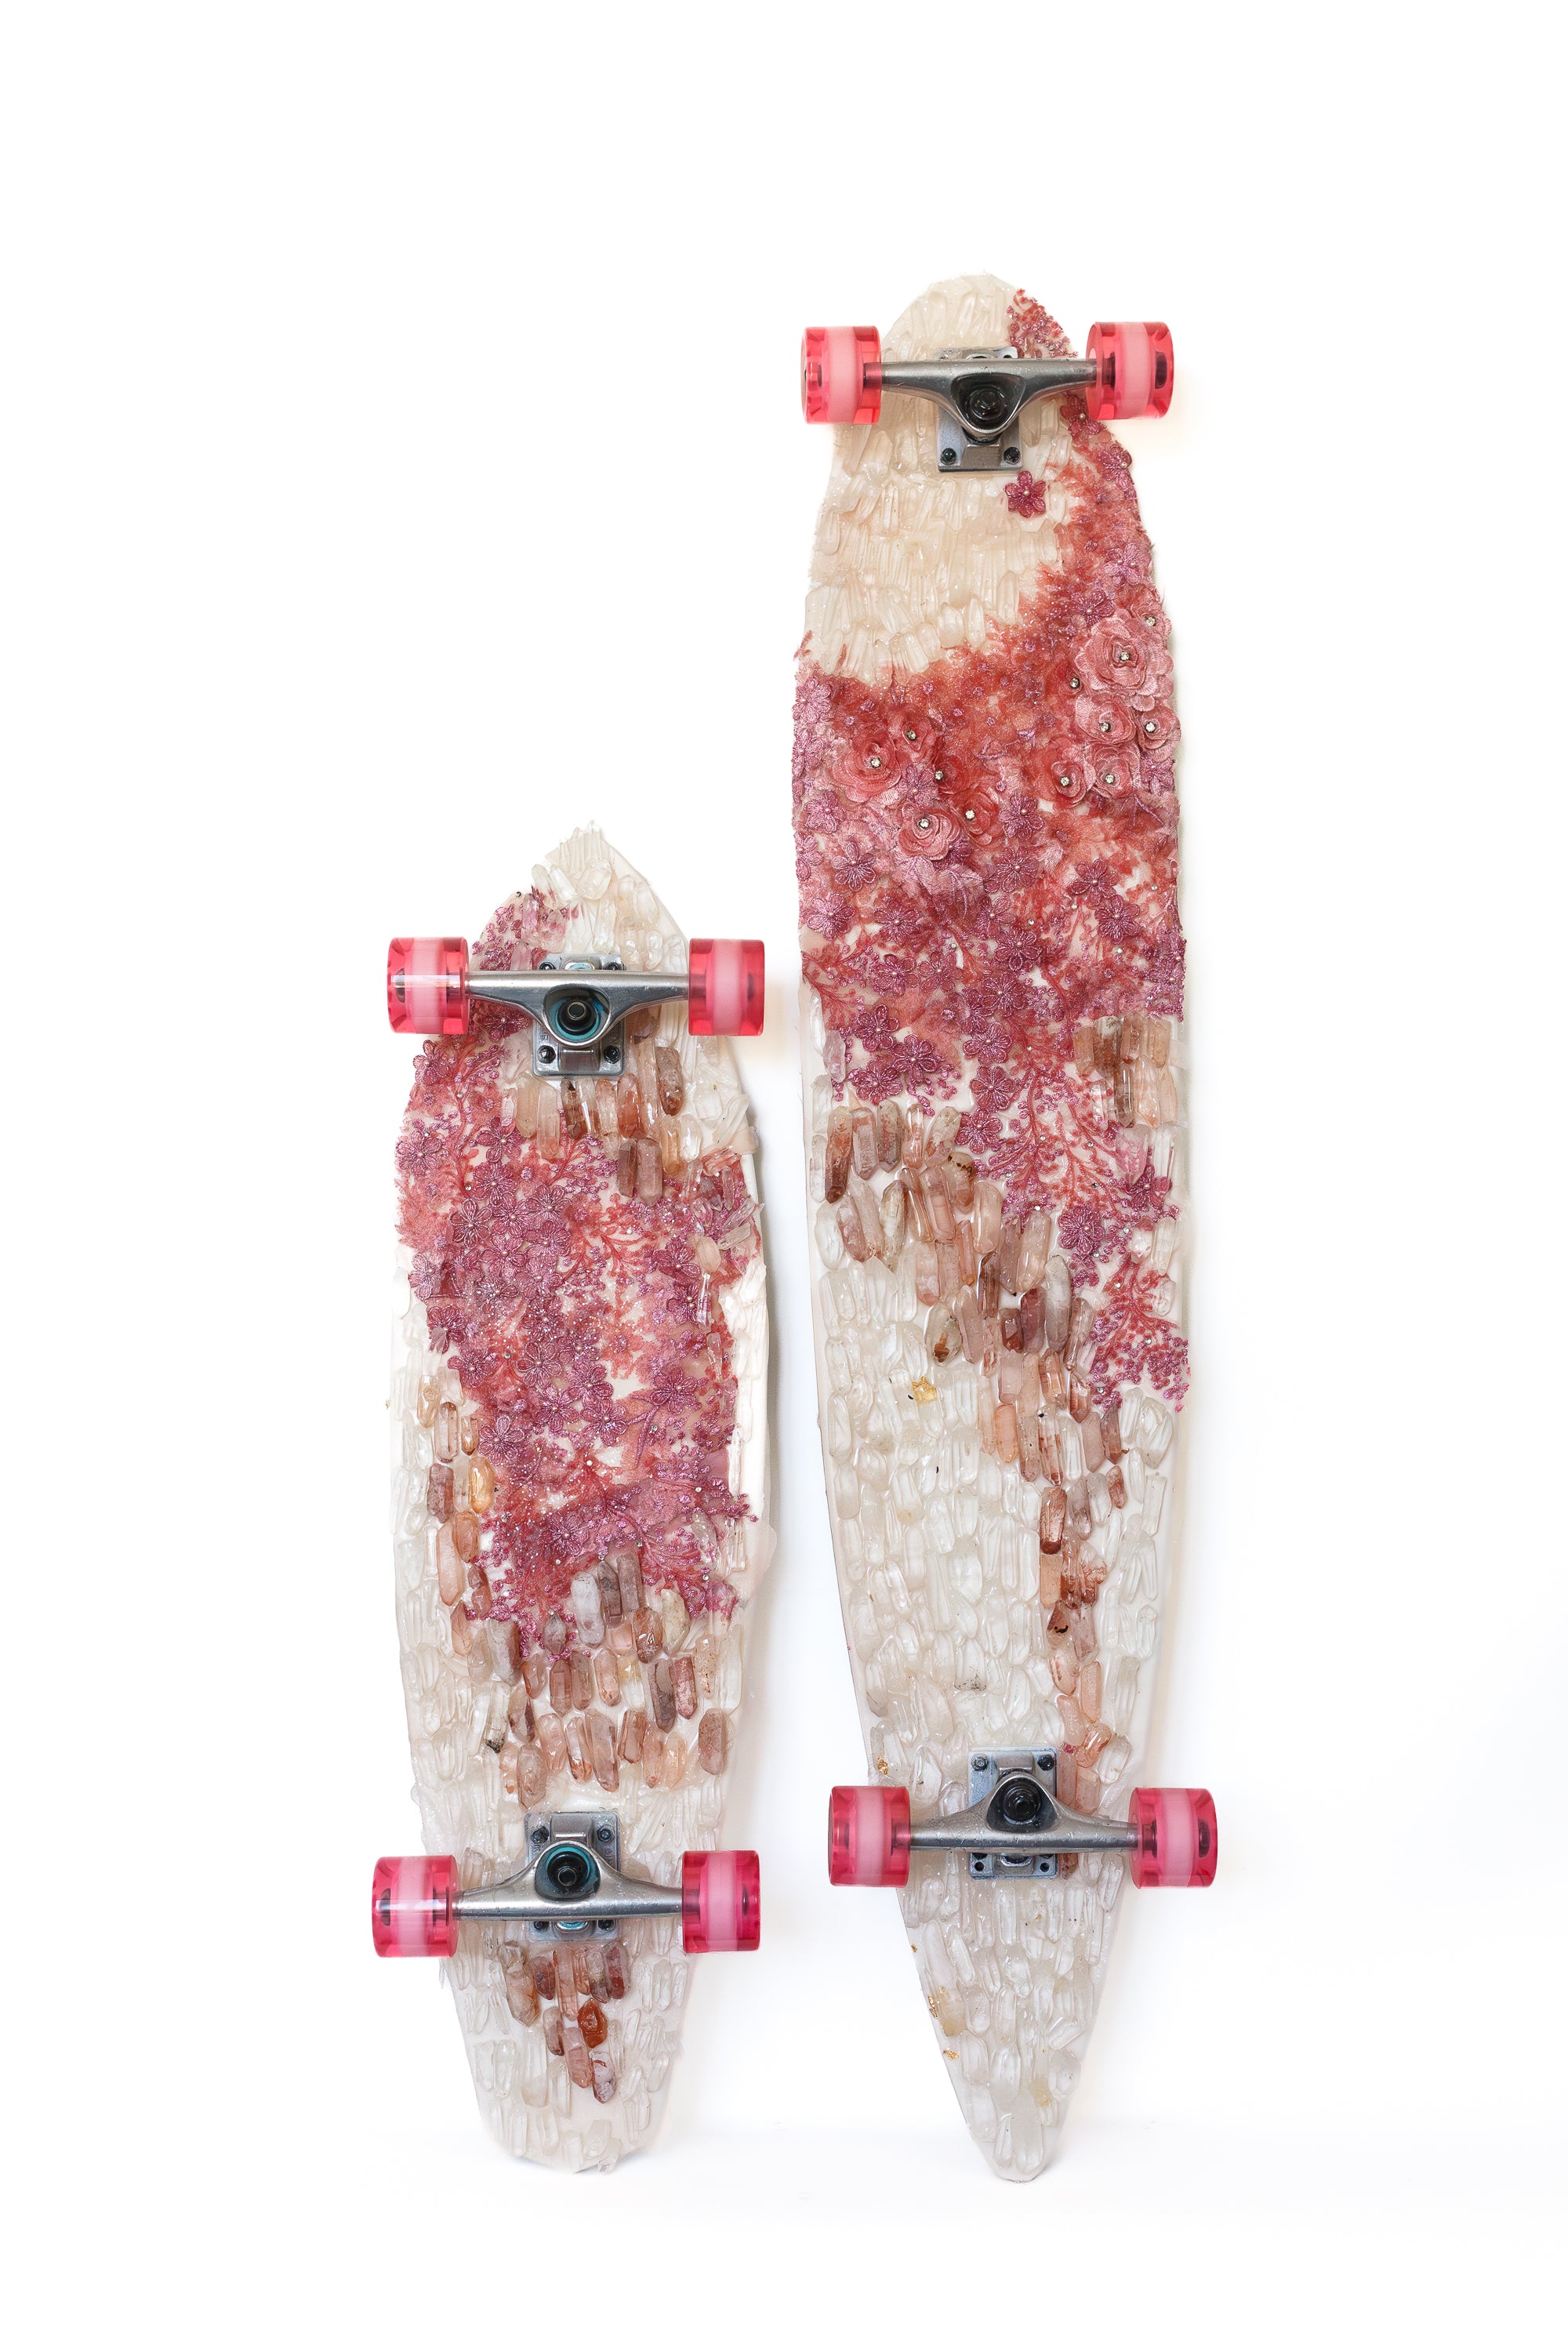 Cali Couture Fine art Collection - skateboard - " Mermaid Dream" set of Two